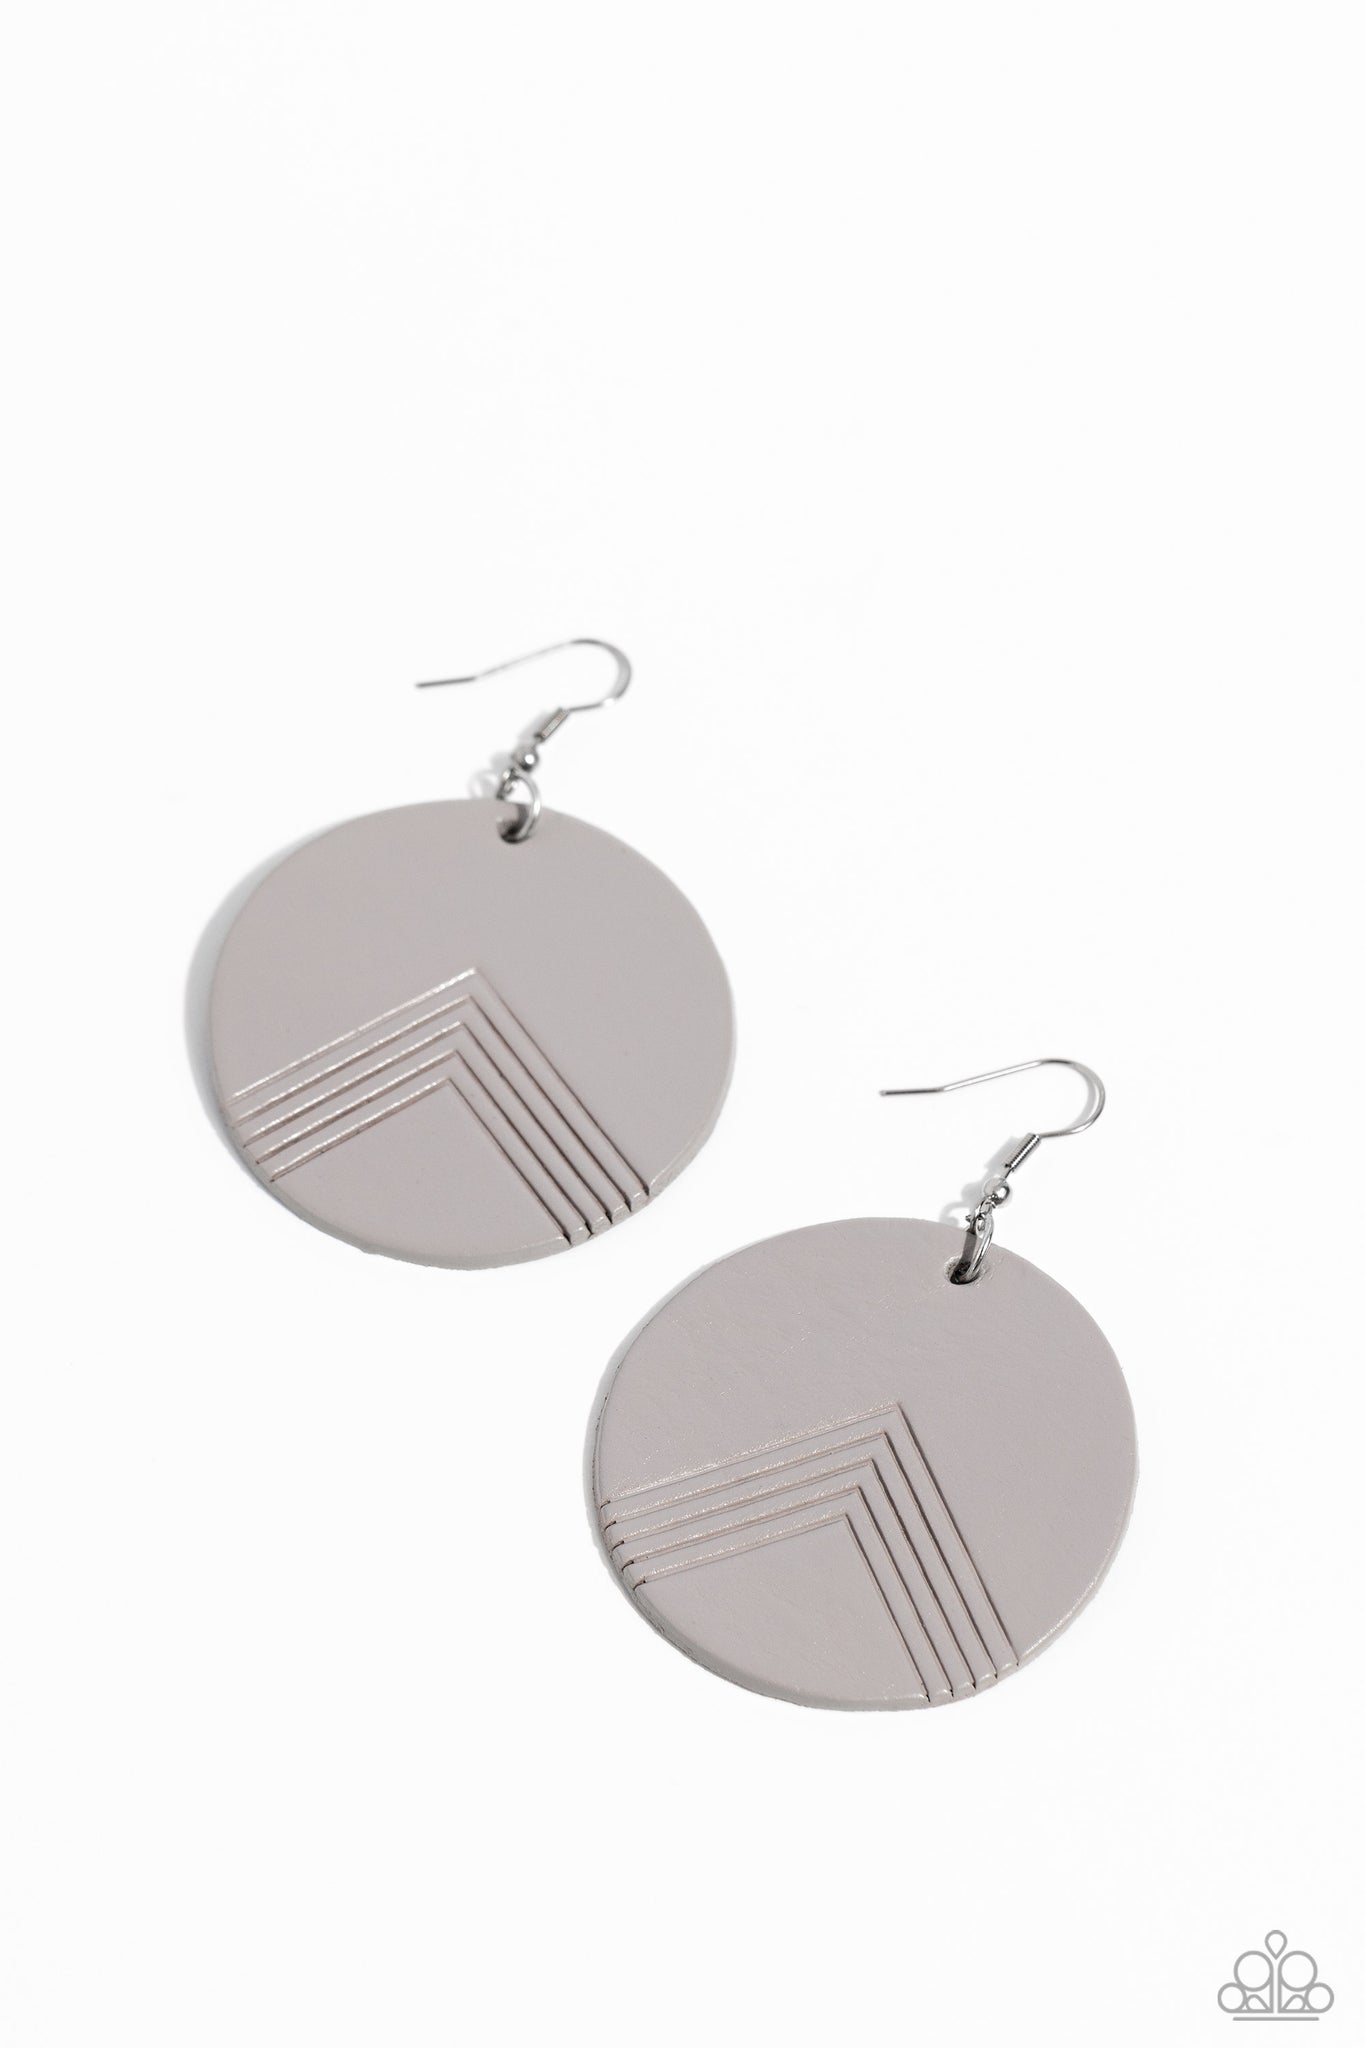 Paparazzi - On the Edge of Edgy - Silver Earrings